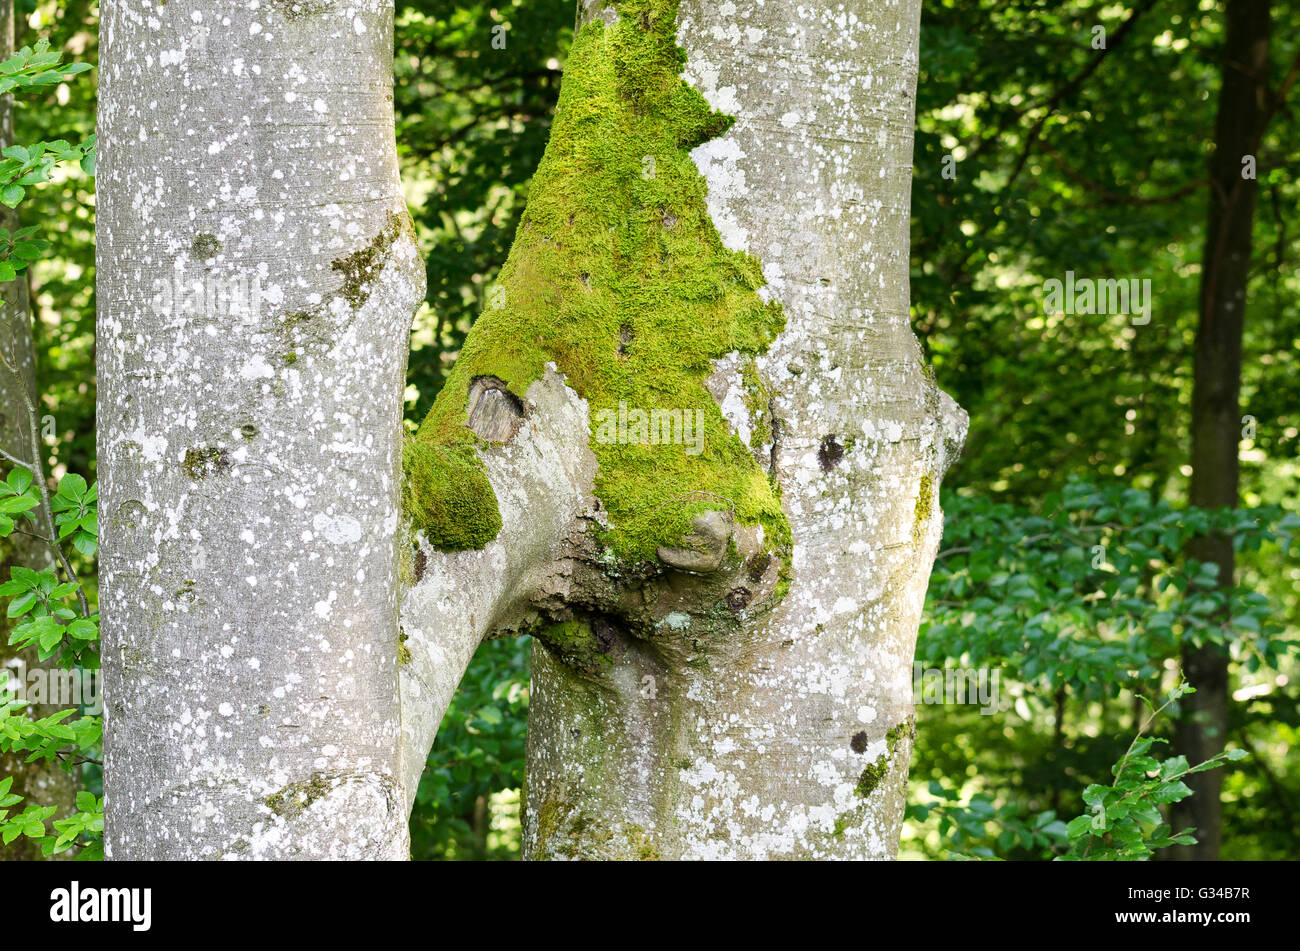 Two beech trees of the same species grow together. This natural phenomenon is called inosculation. Stock Photo